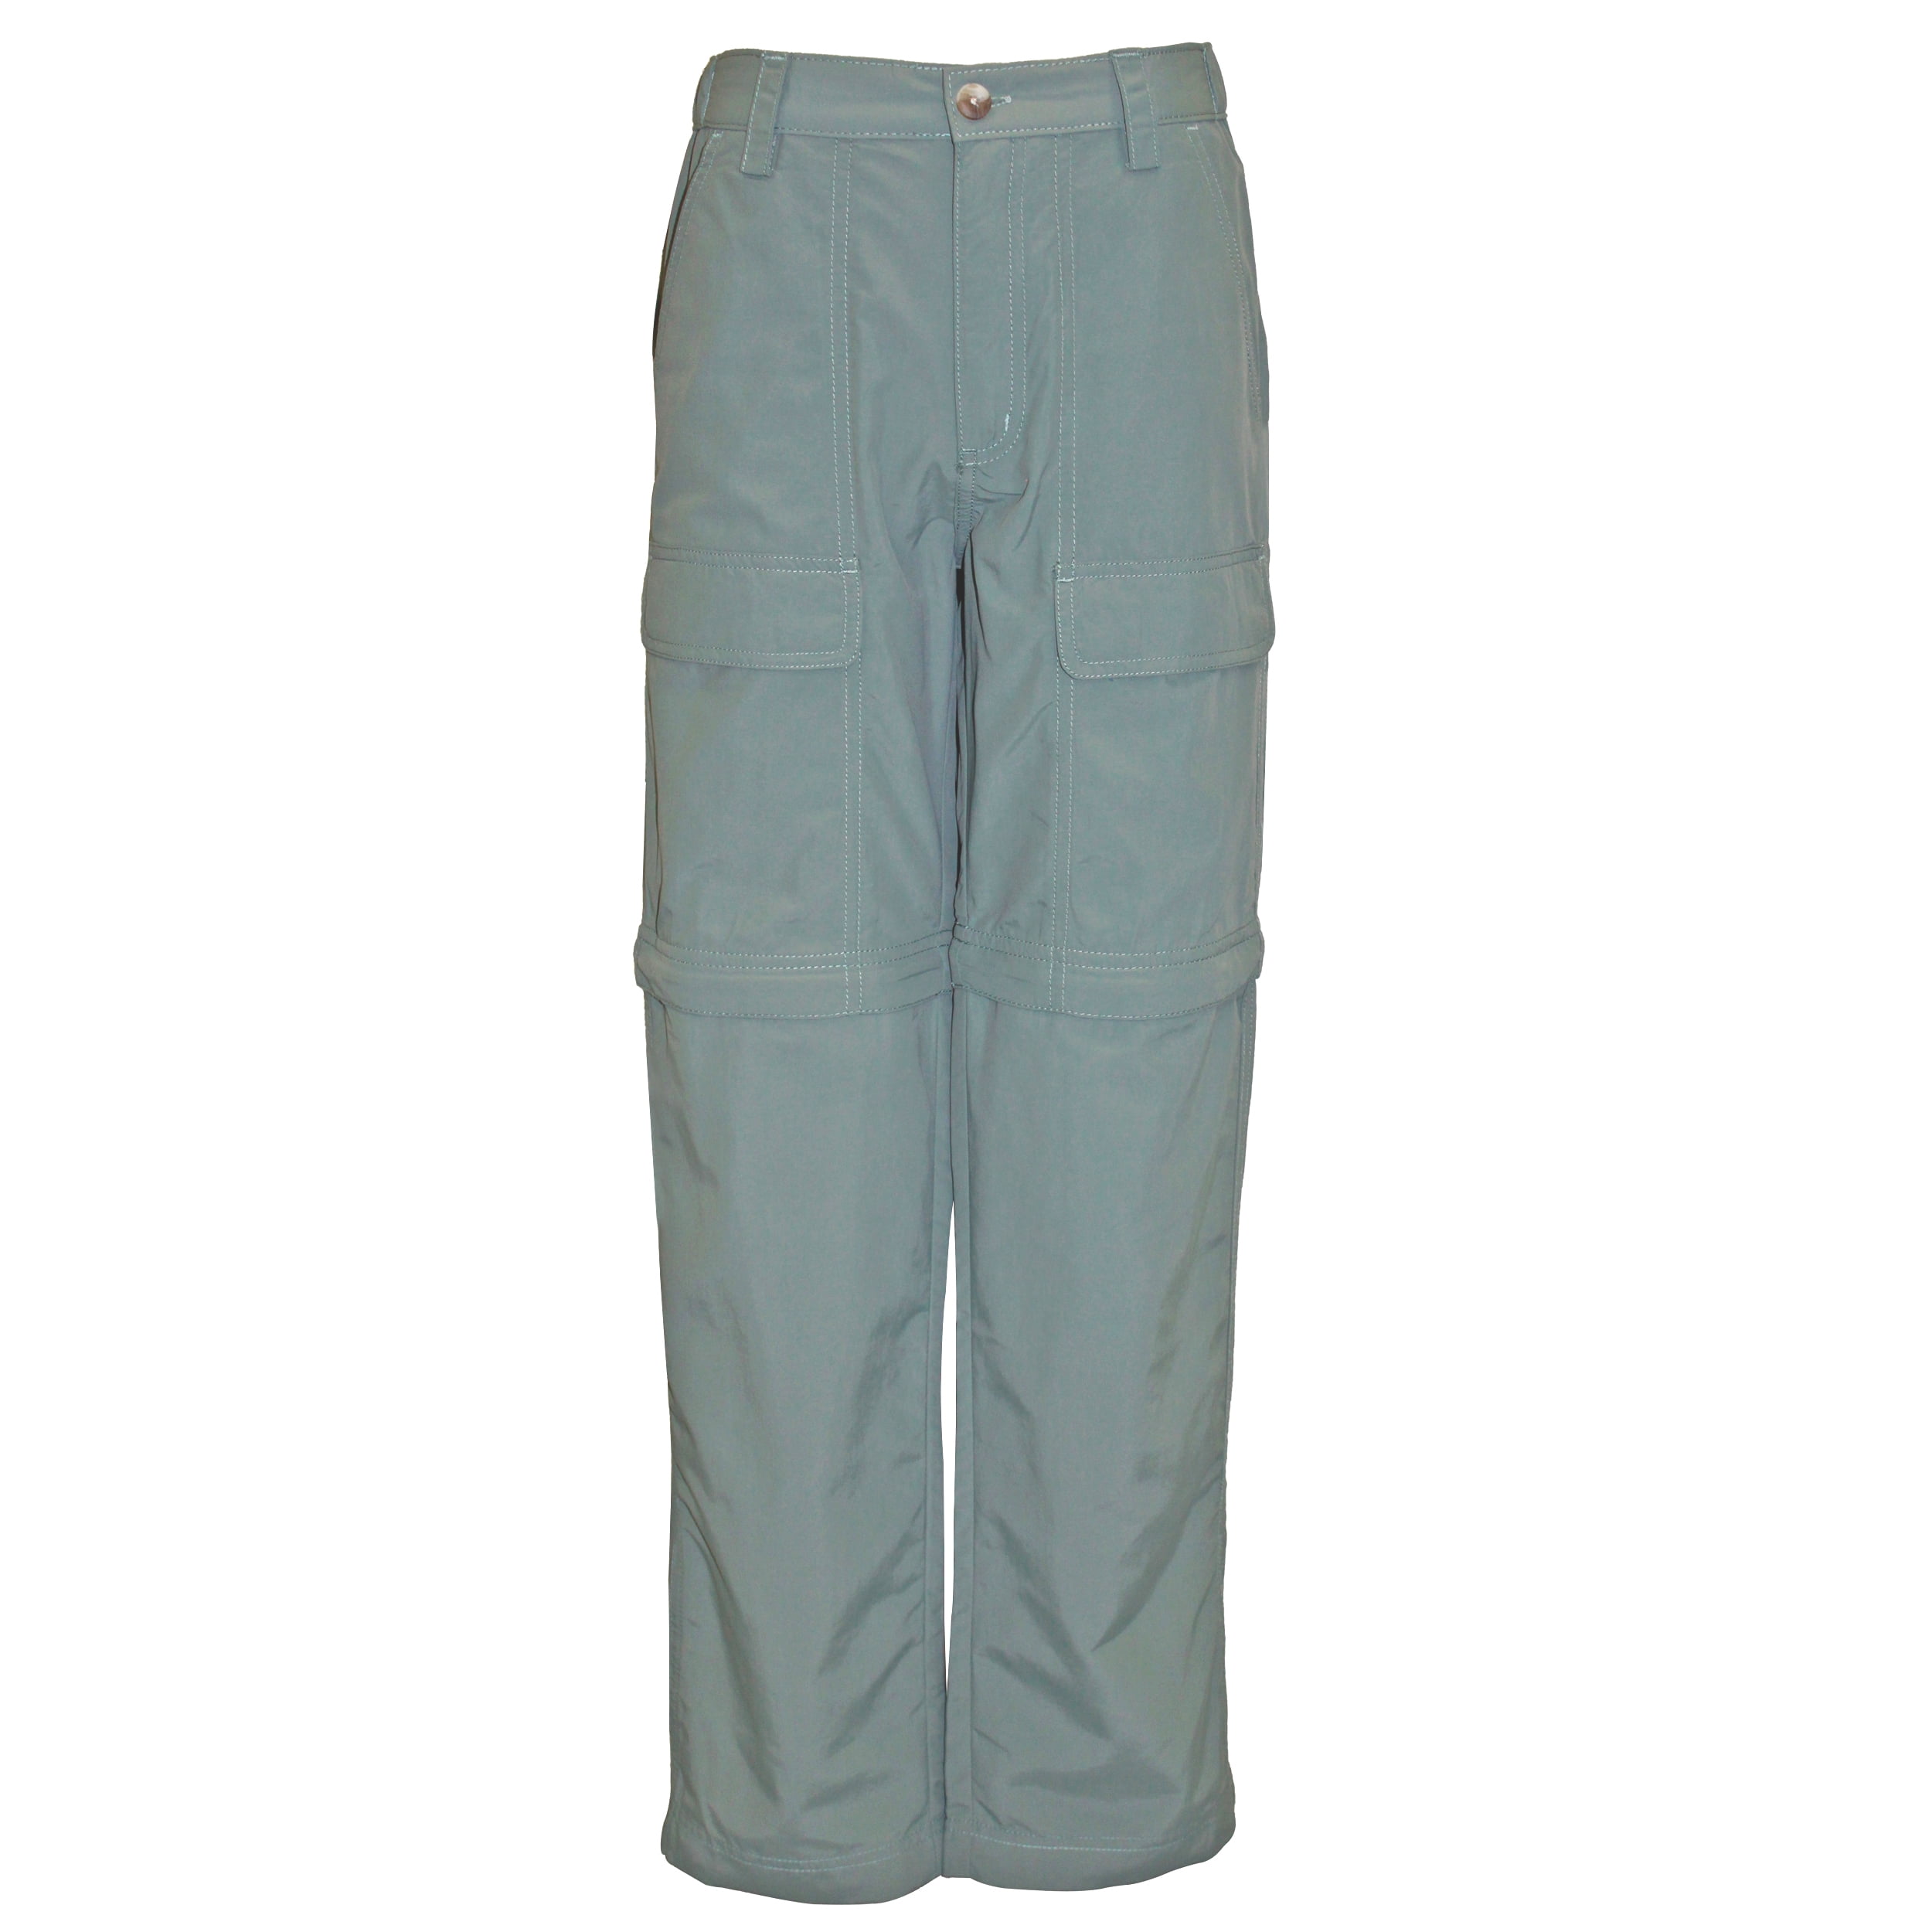 Small Castle Rock White Sierra Youth Trail Convertible Pants 